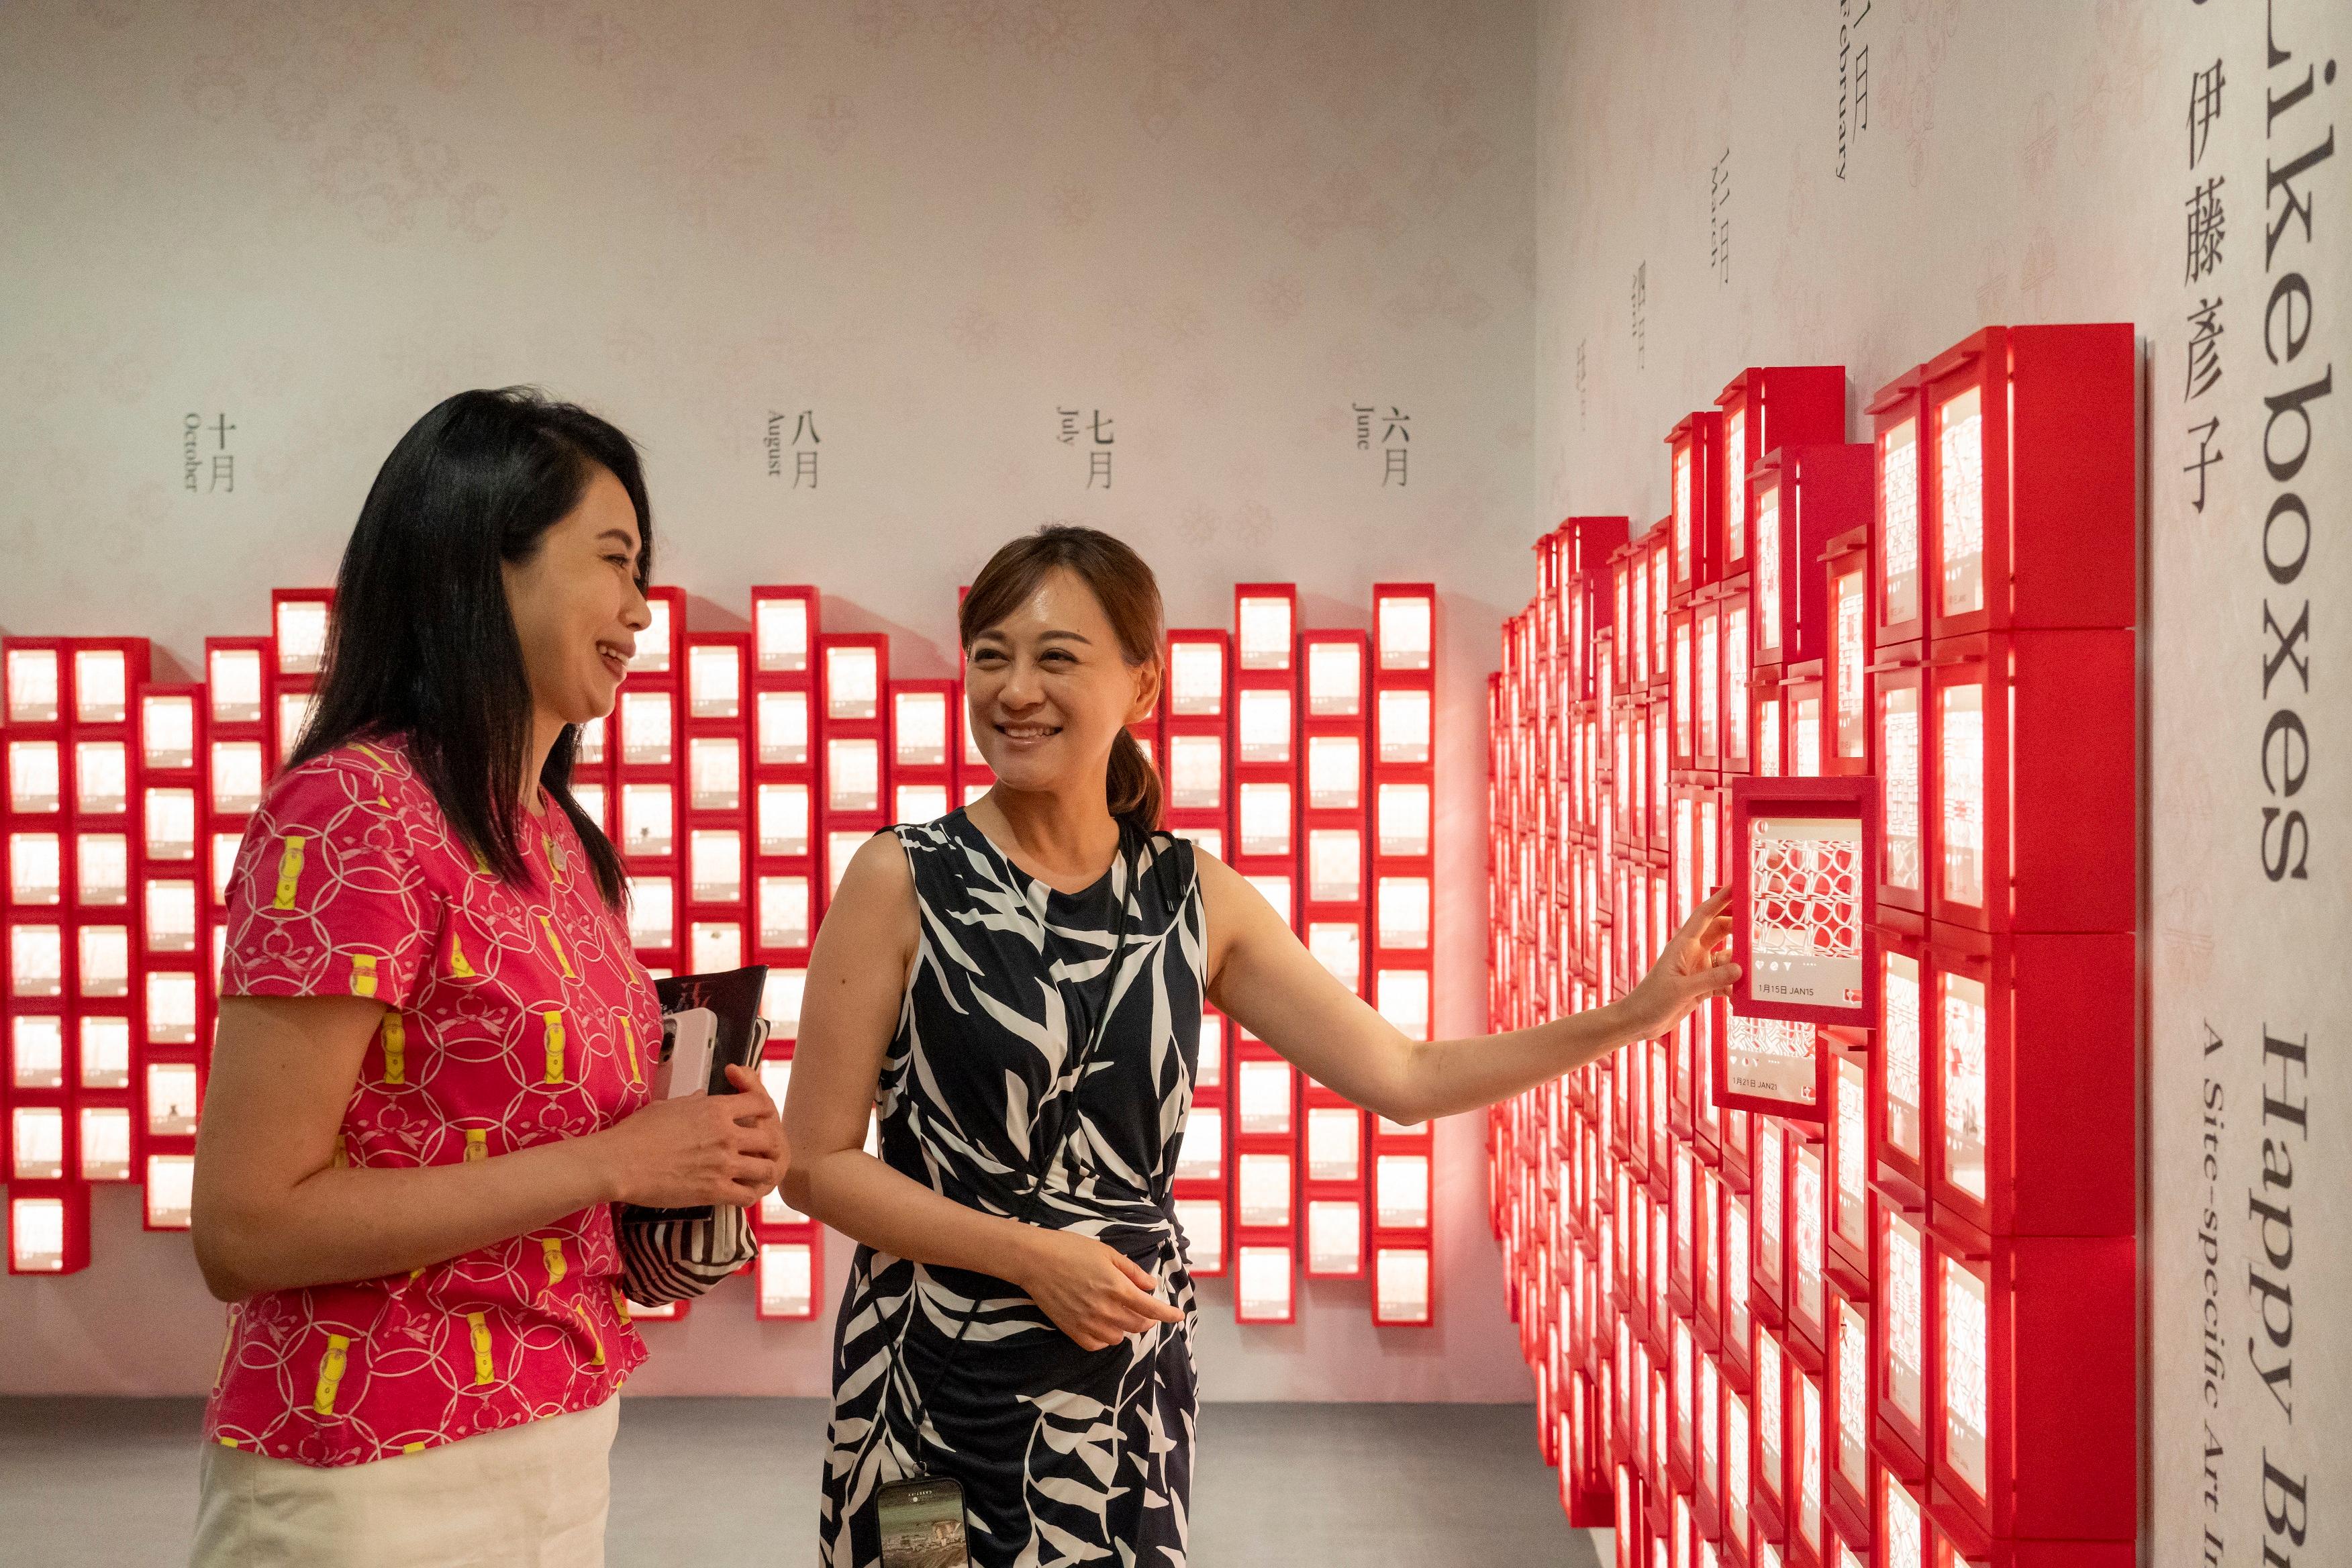 The Hong Kong Museum of Art (HKMoA) of the Leisure and Cultural Services Department has been popular among the local public and tourists. The number of visitors has reached a new high since its reopening after a major renovation in 2019 and the HKMoA welcomed its 2,000,000th visitor today (August 12). The museum arranged for the visitor a specially guided tour on exhibitions by the Museum Director of the HKMoA, Dr Maria Mok.